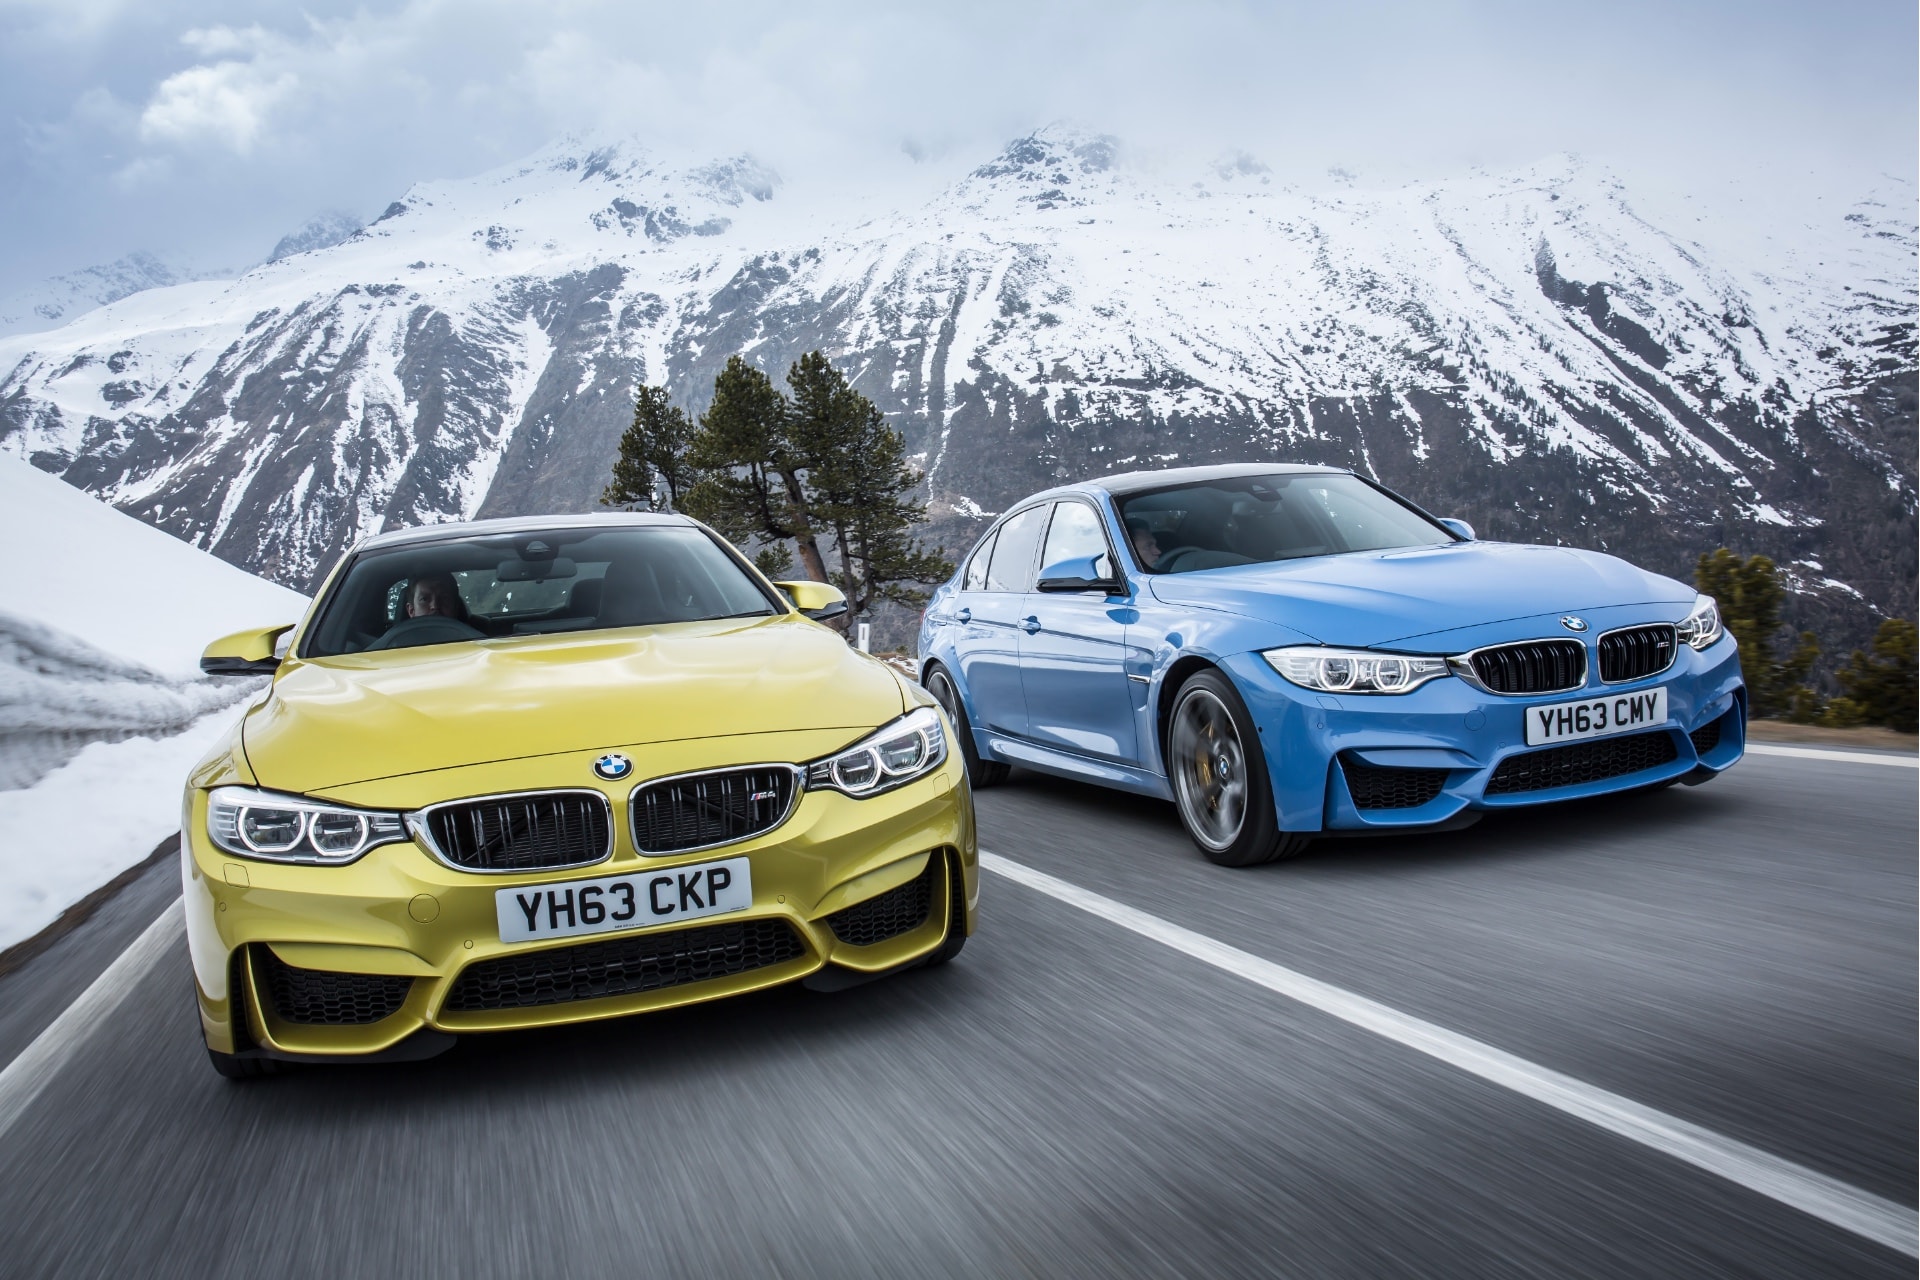 Future BMW M Cars Will Turn to Hybrid Technology, Will Be Faster